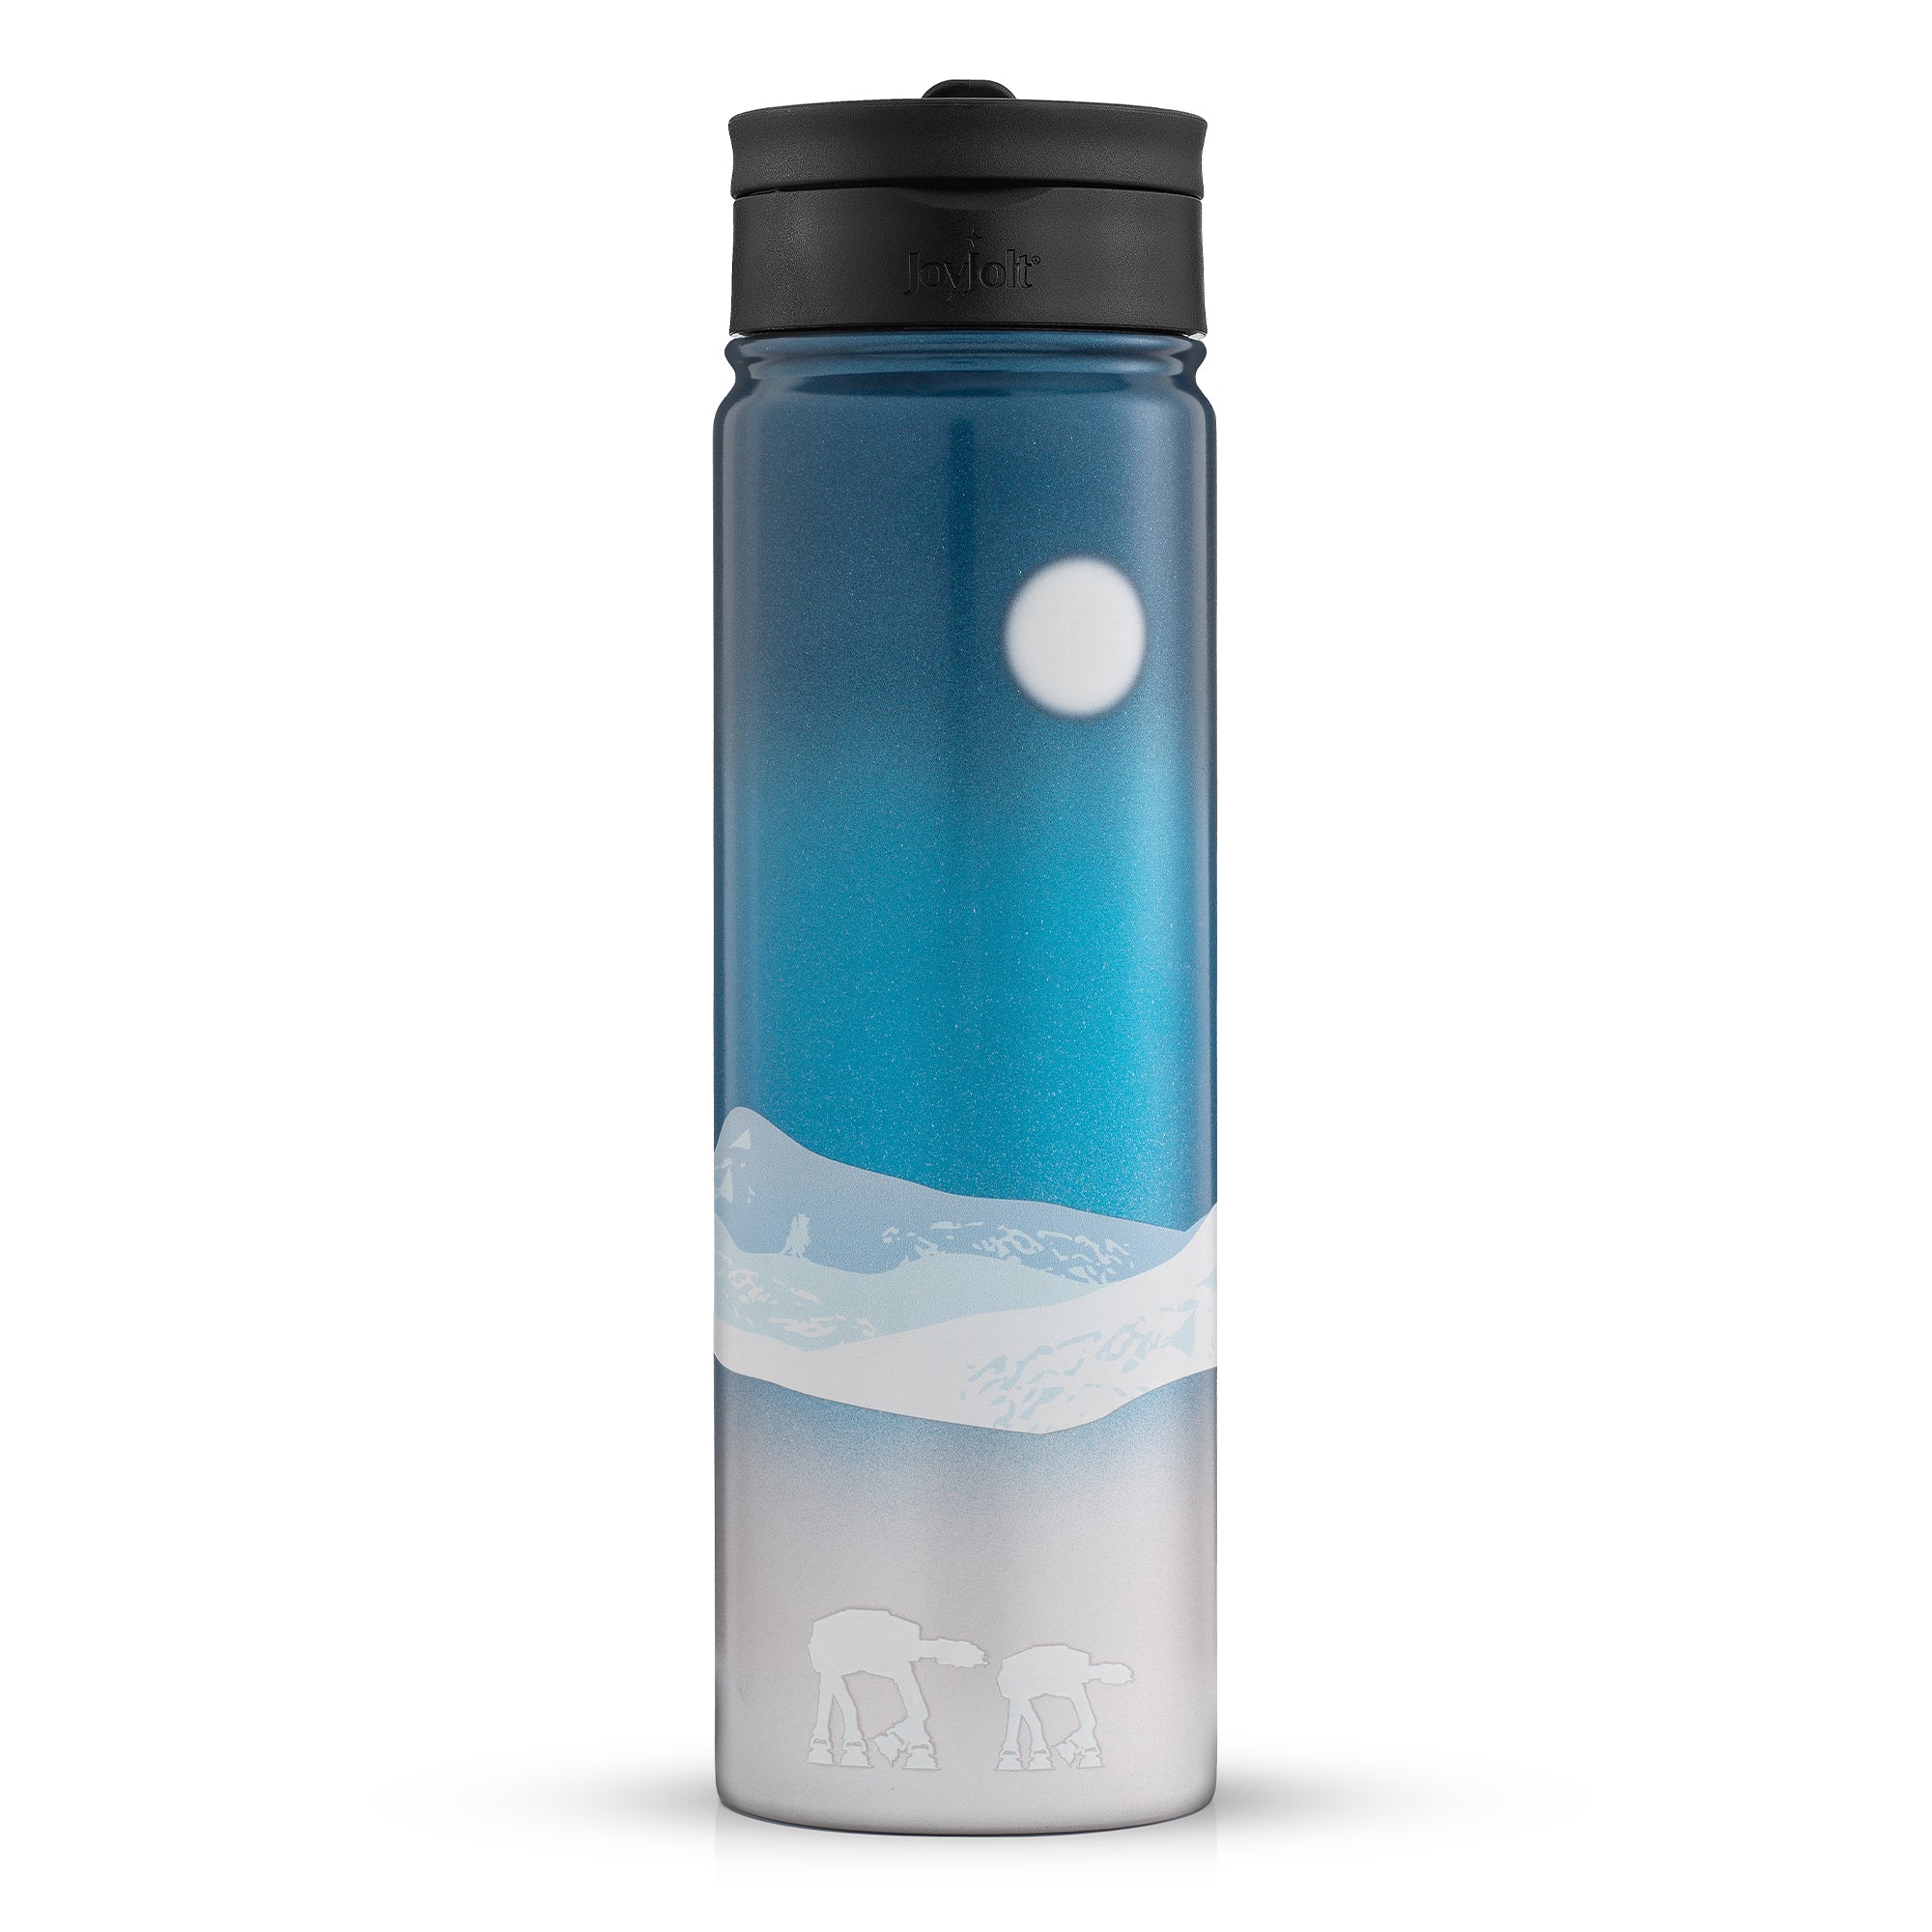 Star Wars™ Destinations Collection Hoth™ Vacuum Insulated Water Bottle